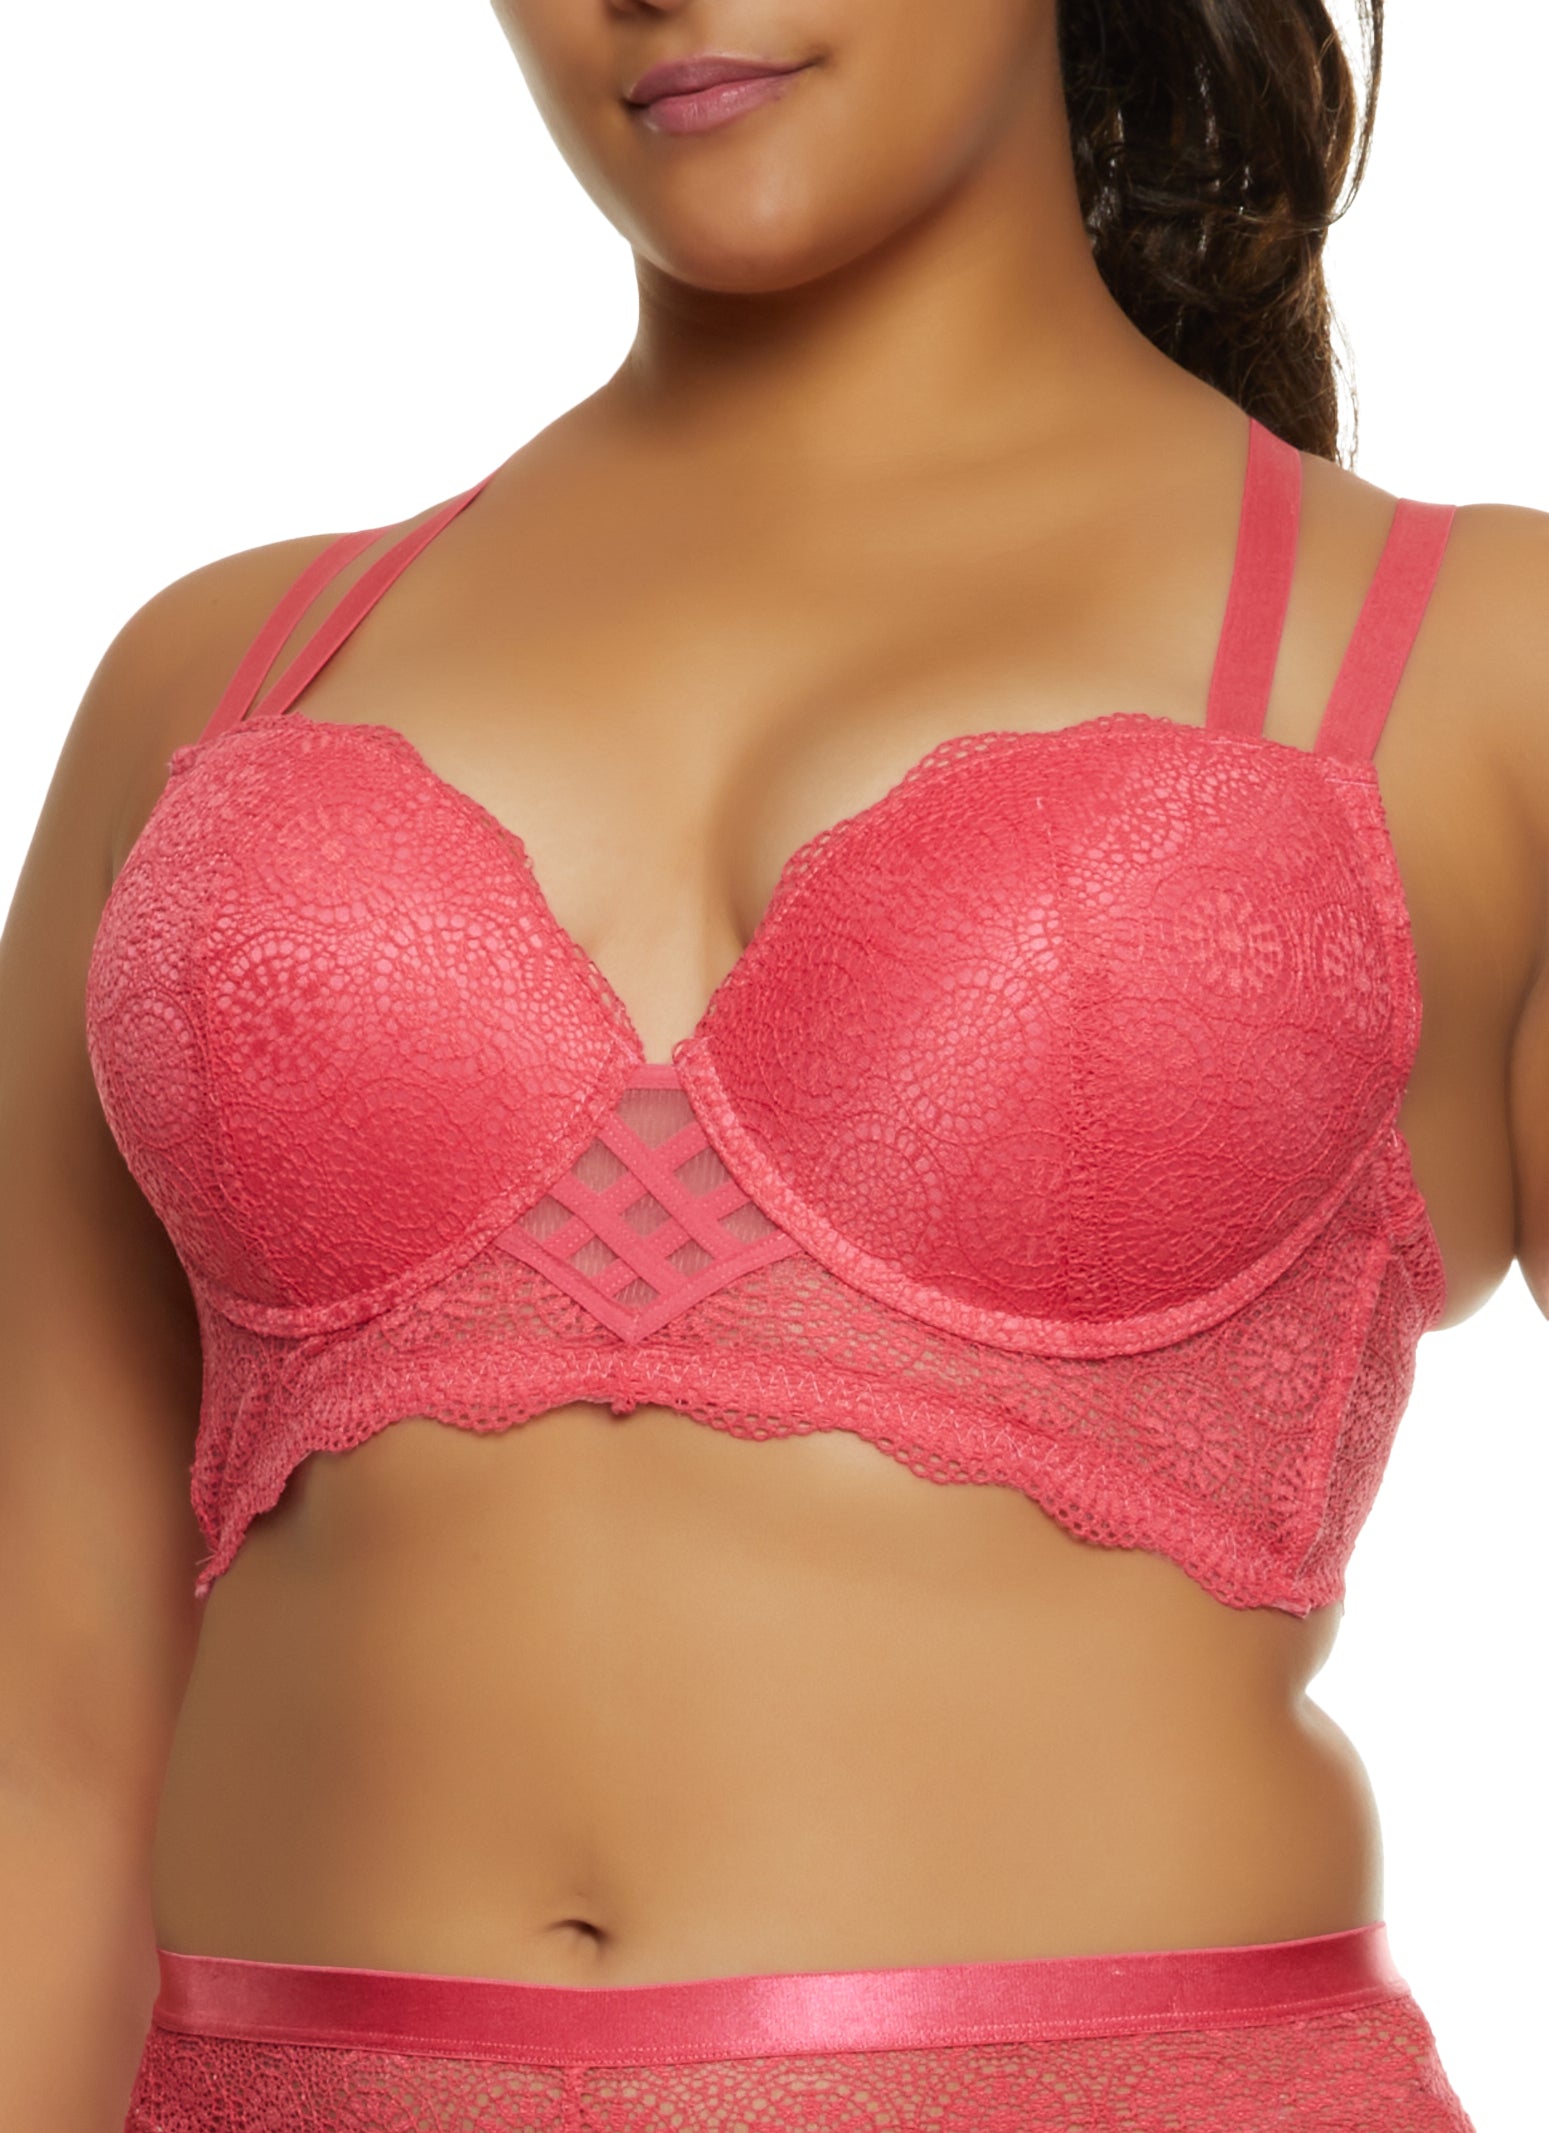 RPVATI Women's Plus Size Bralette Support Hollow Out Lace Comfortable Bra  Pink 5XL 